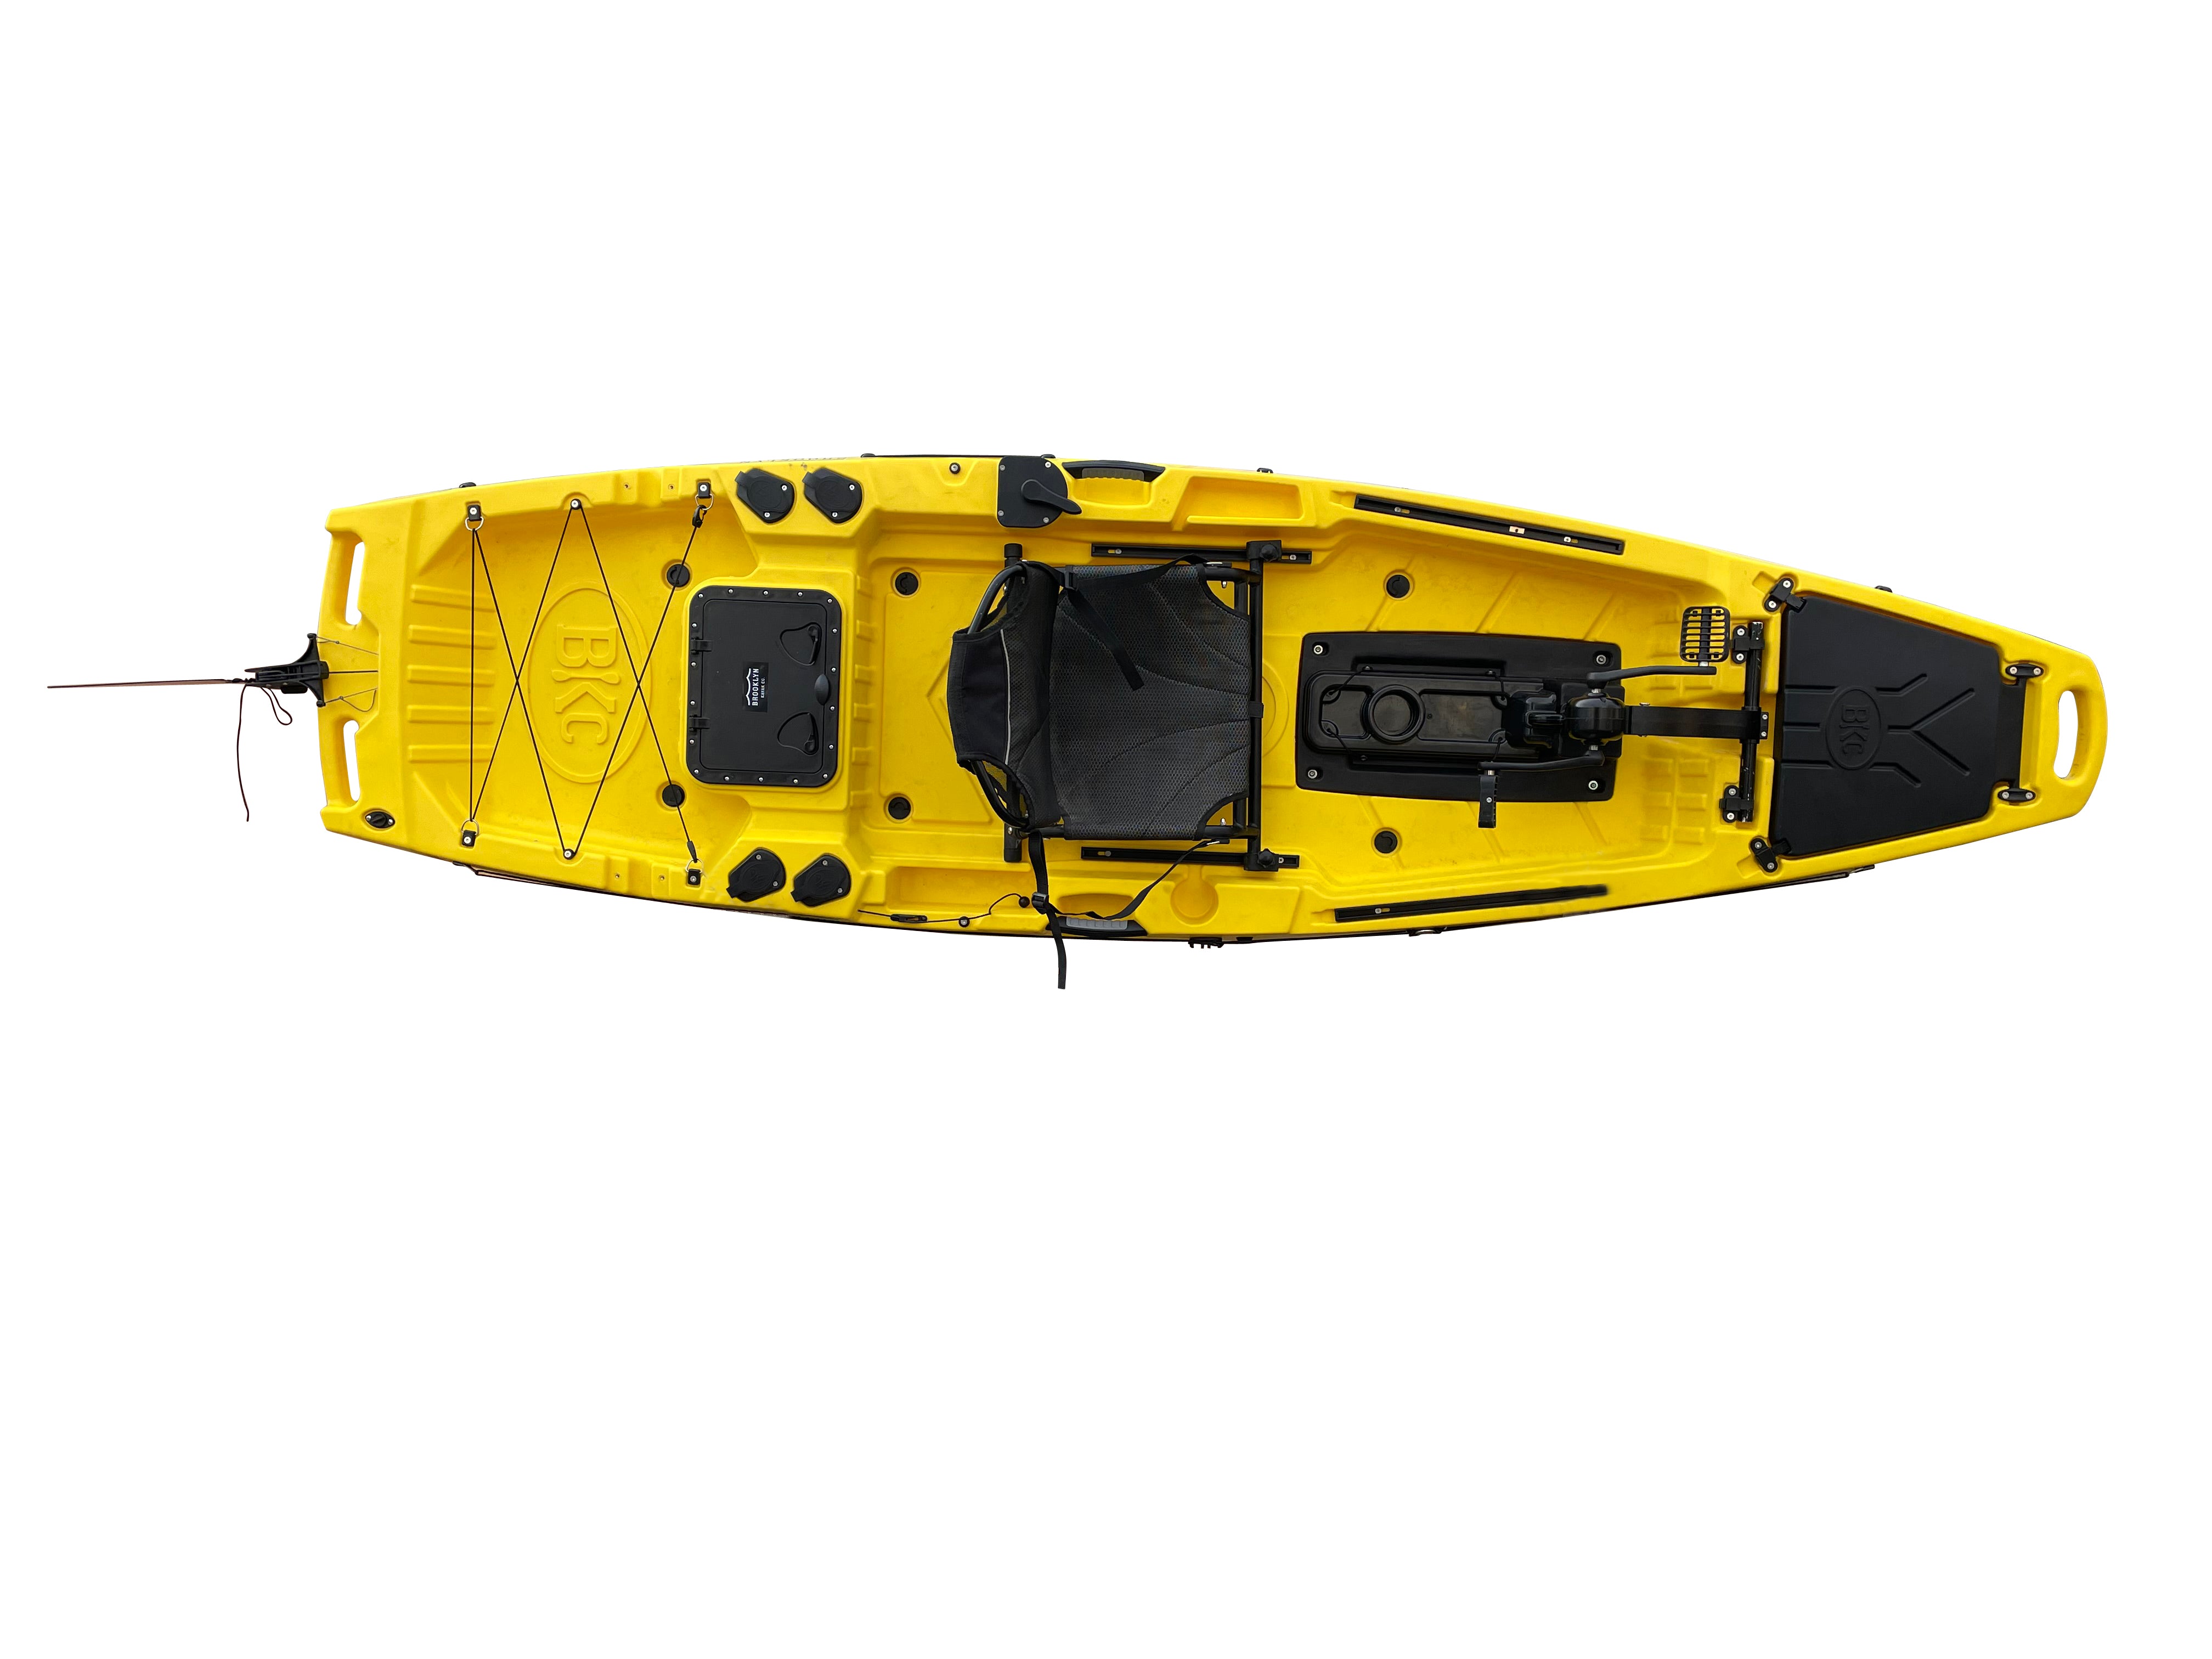 10 Cheapest Pedal Kayaks in 2023: Reviews & Buyer's Guide 